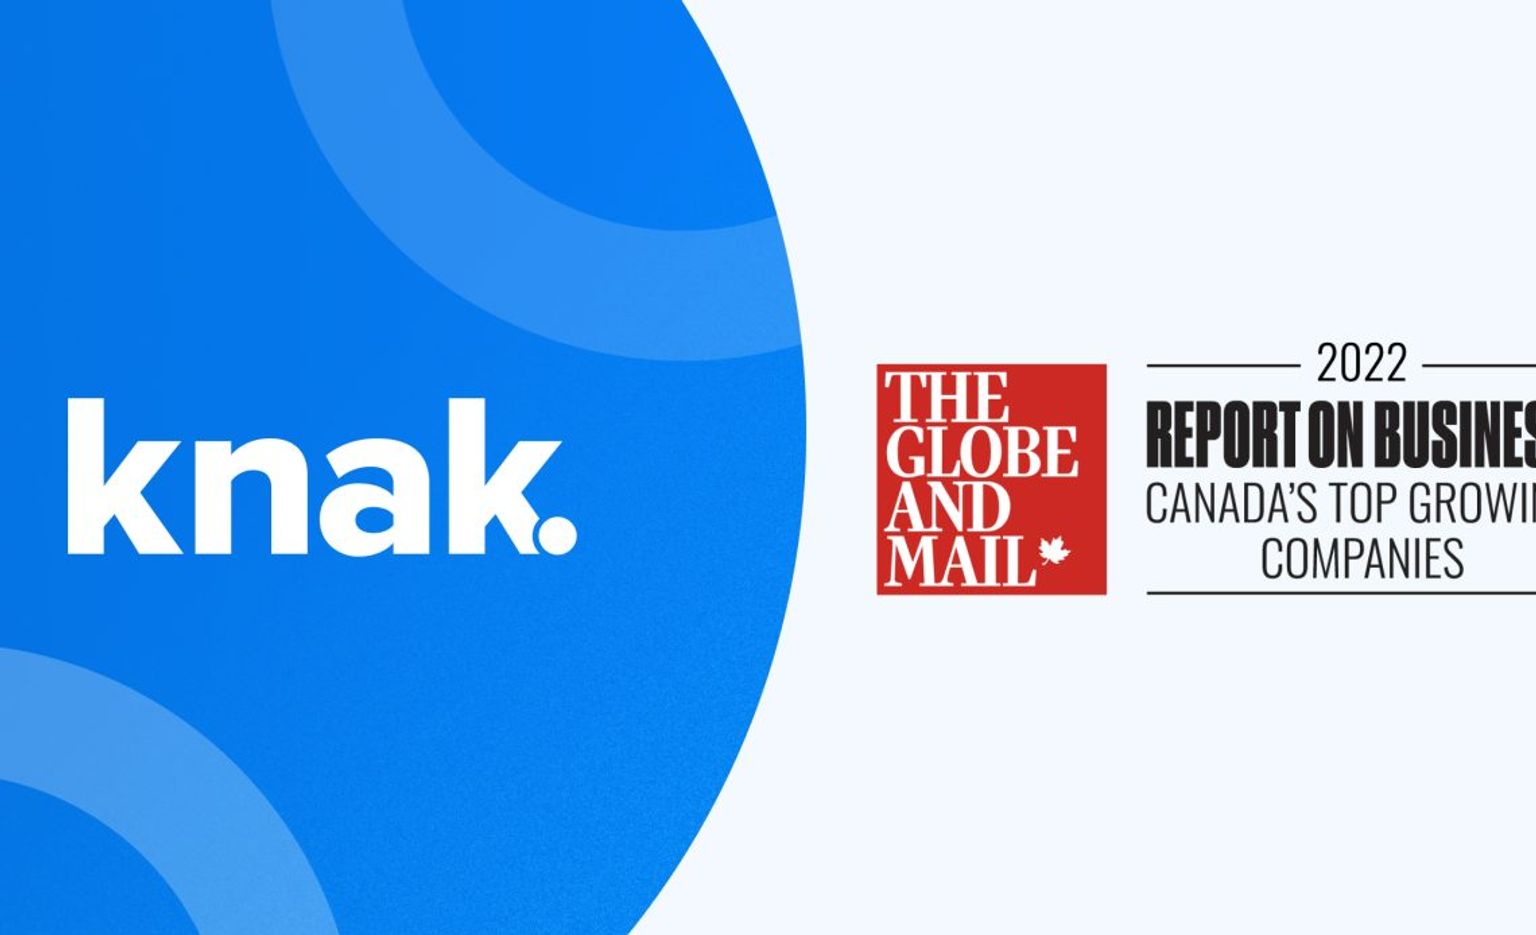 Knak joins the list of The Globe and Mail’s Top Growing Companies of 2022